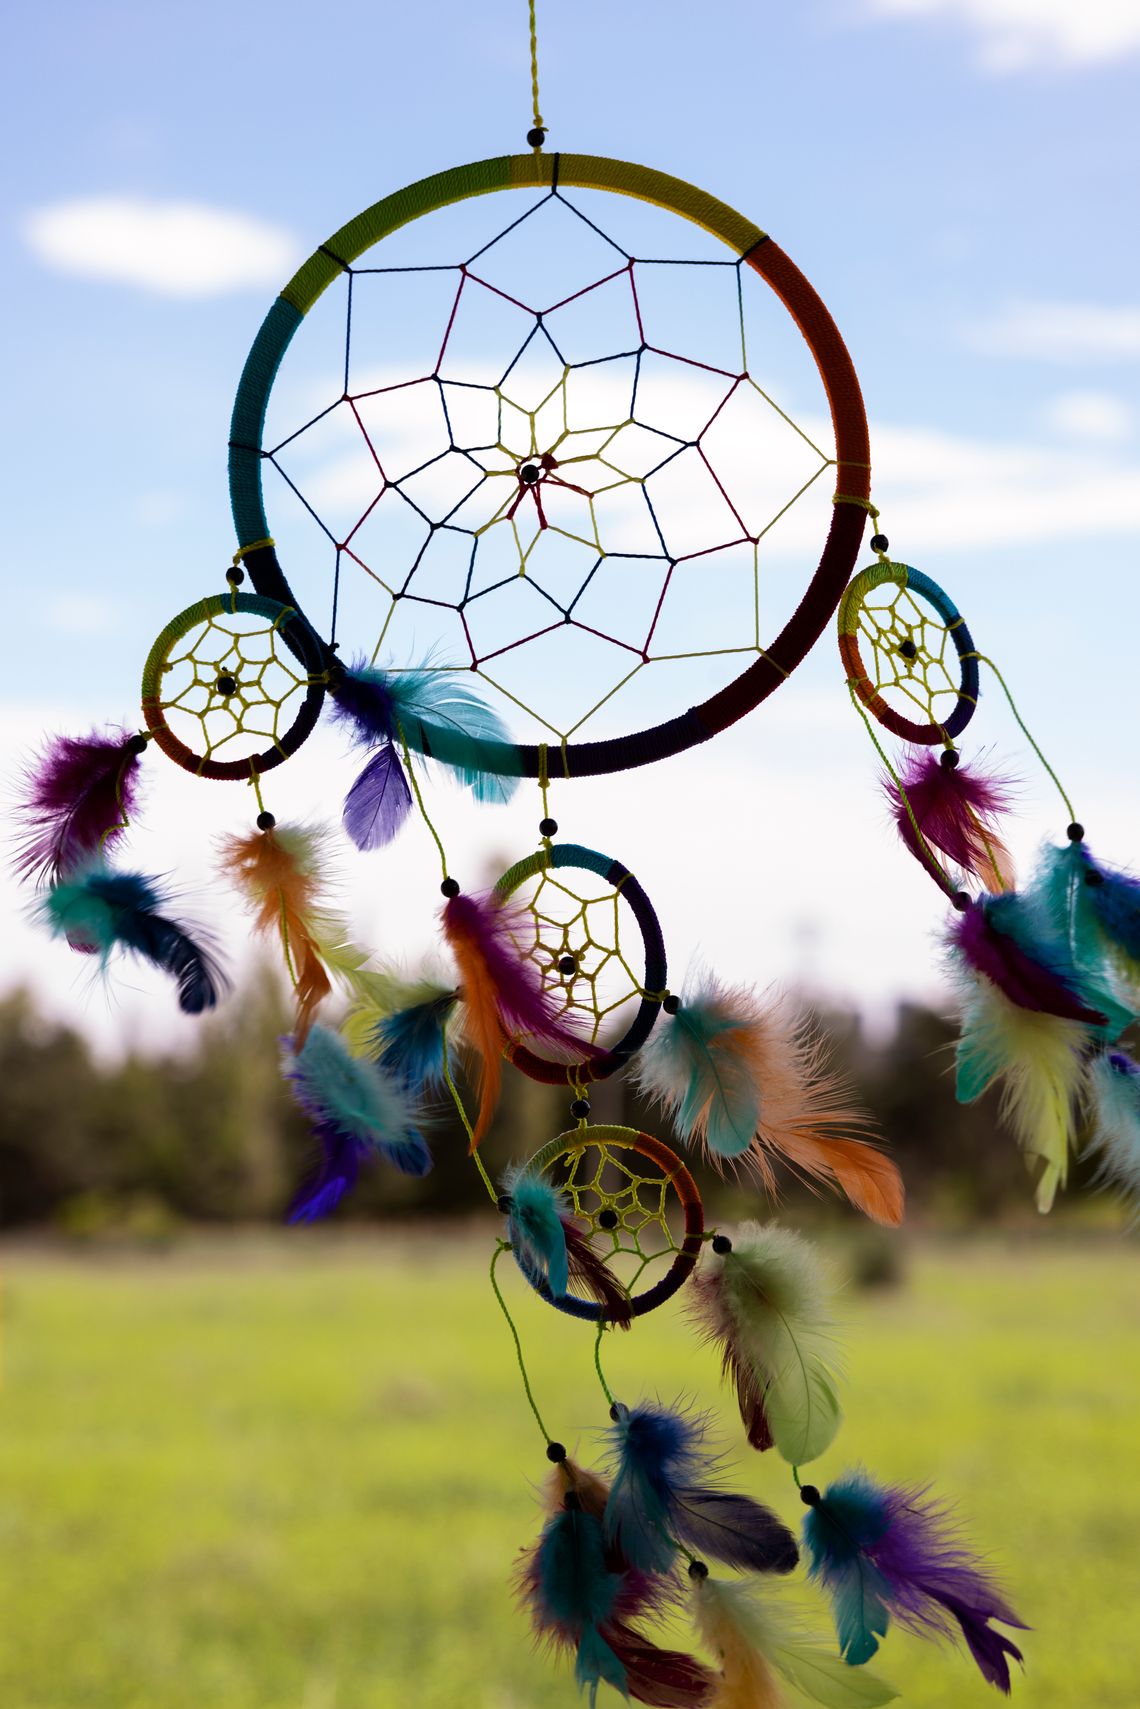 Hagerman NWR to host Choctaw Cultural Day on Saturday, May 11